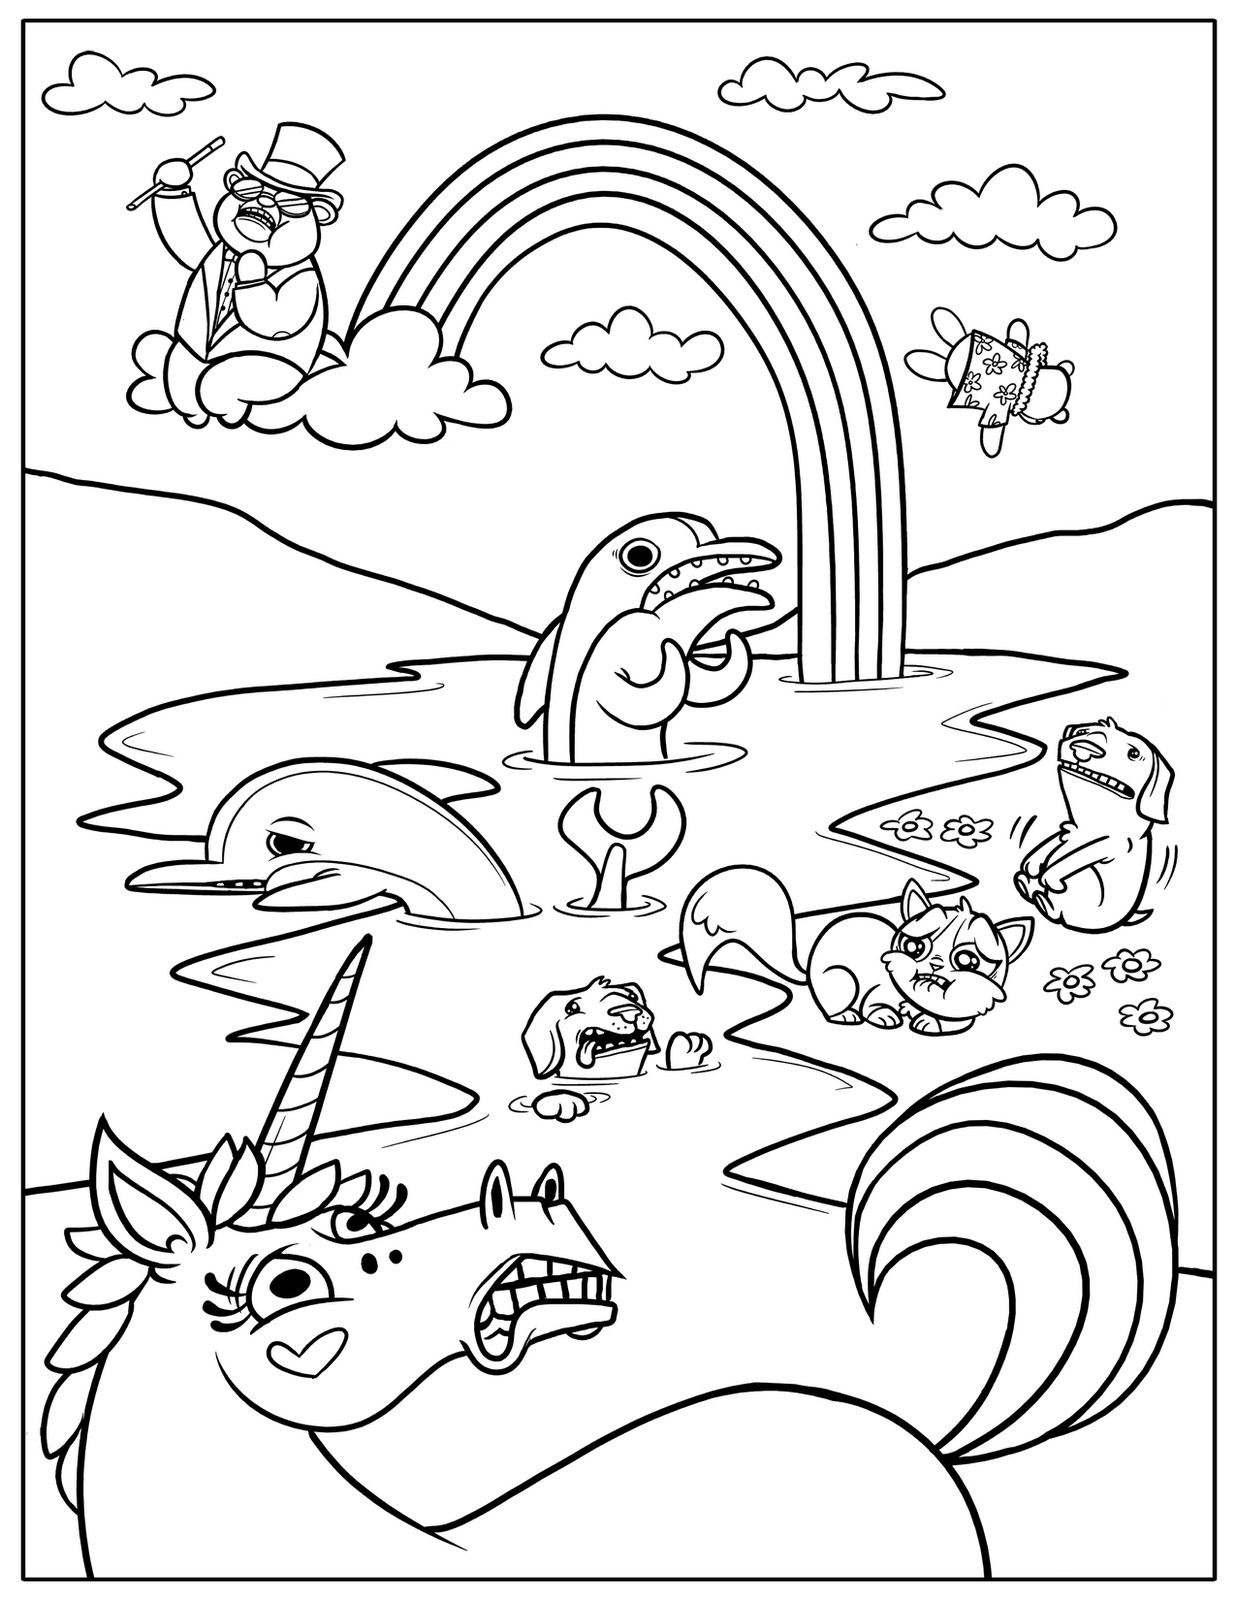 Online Coloring Pages For Kids Games
 Free Printable Rainbow Coloring Pages For Kids